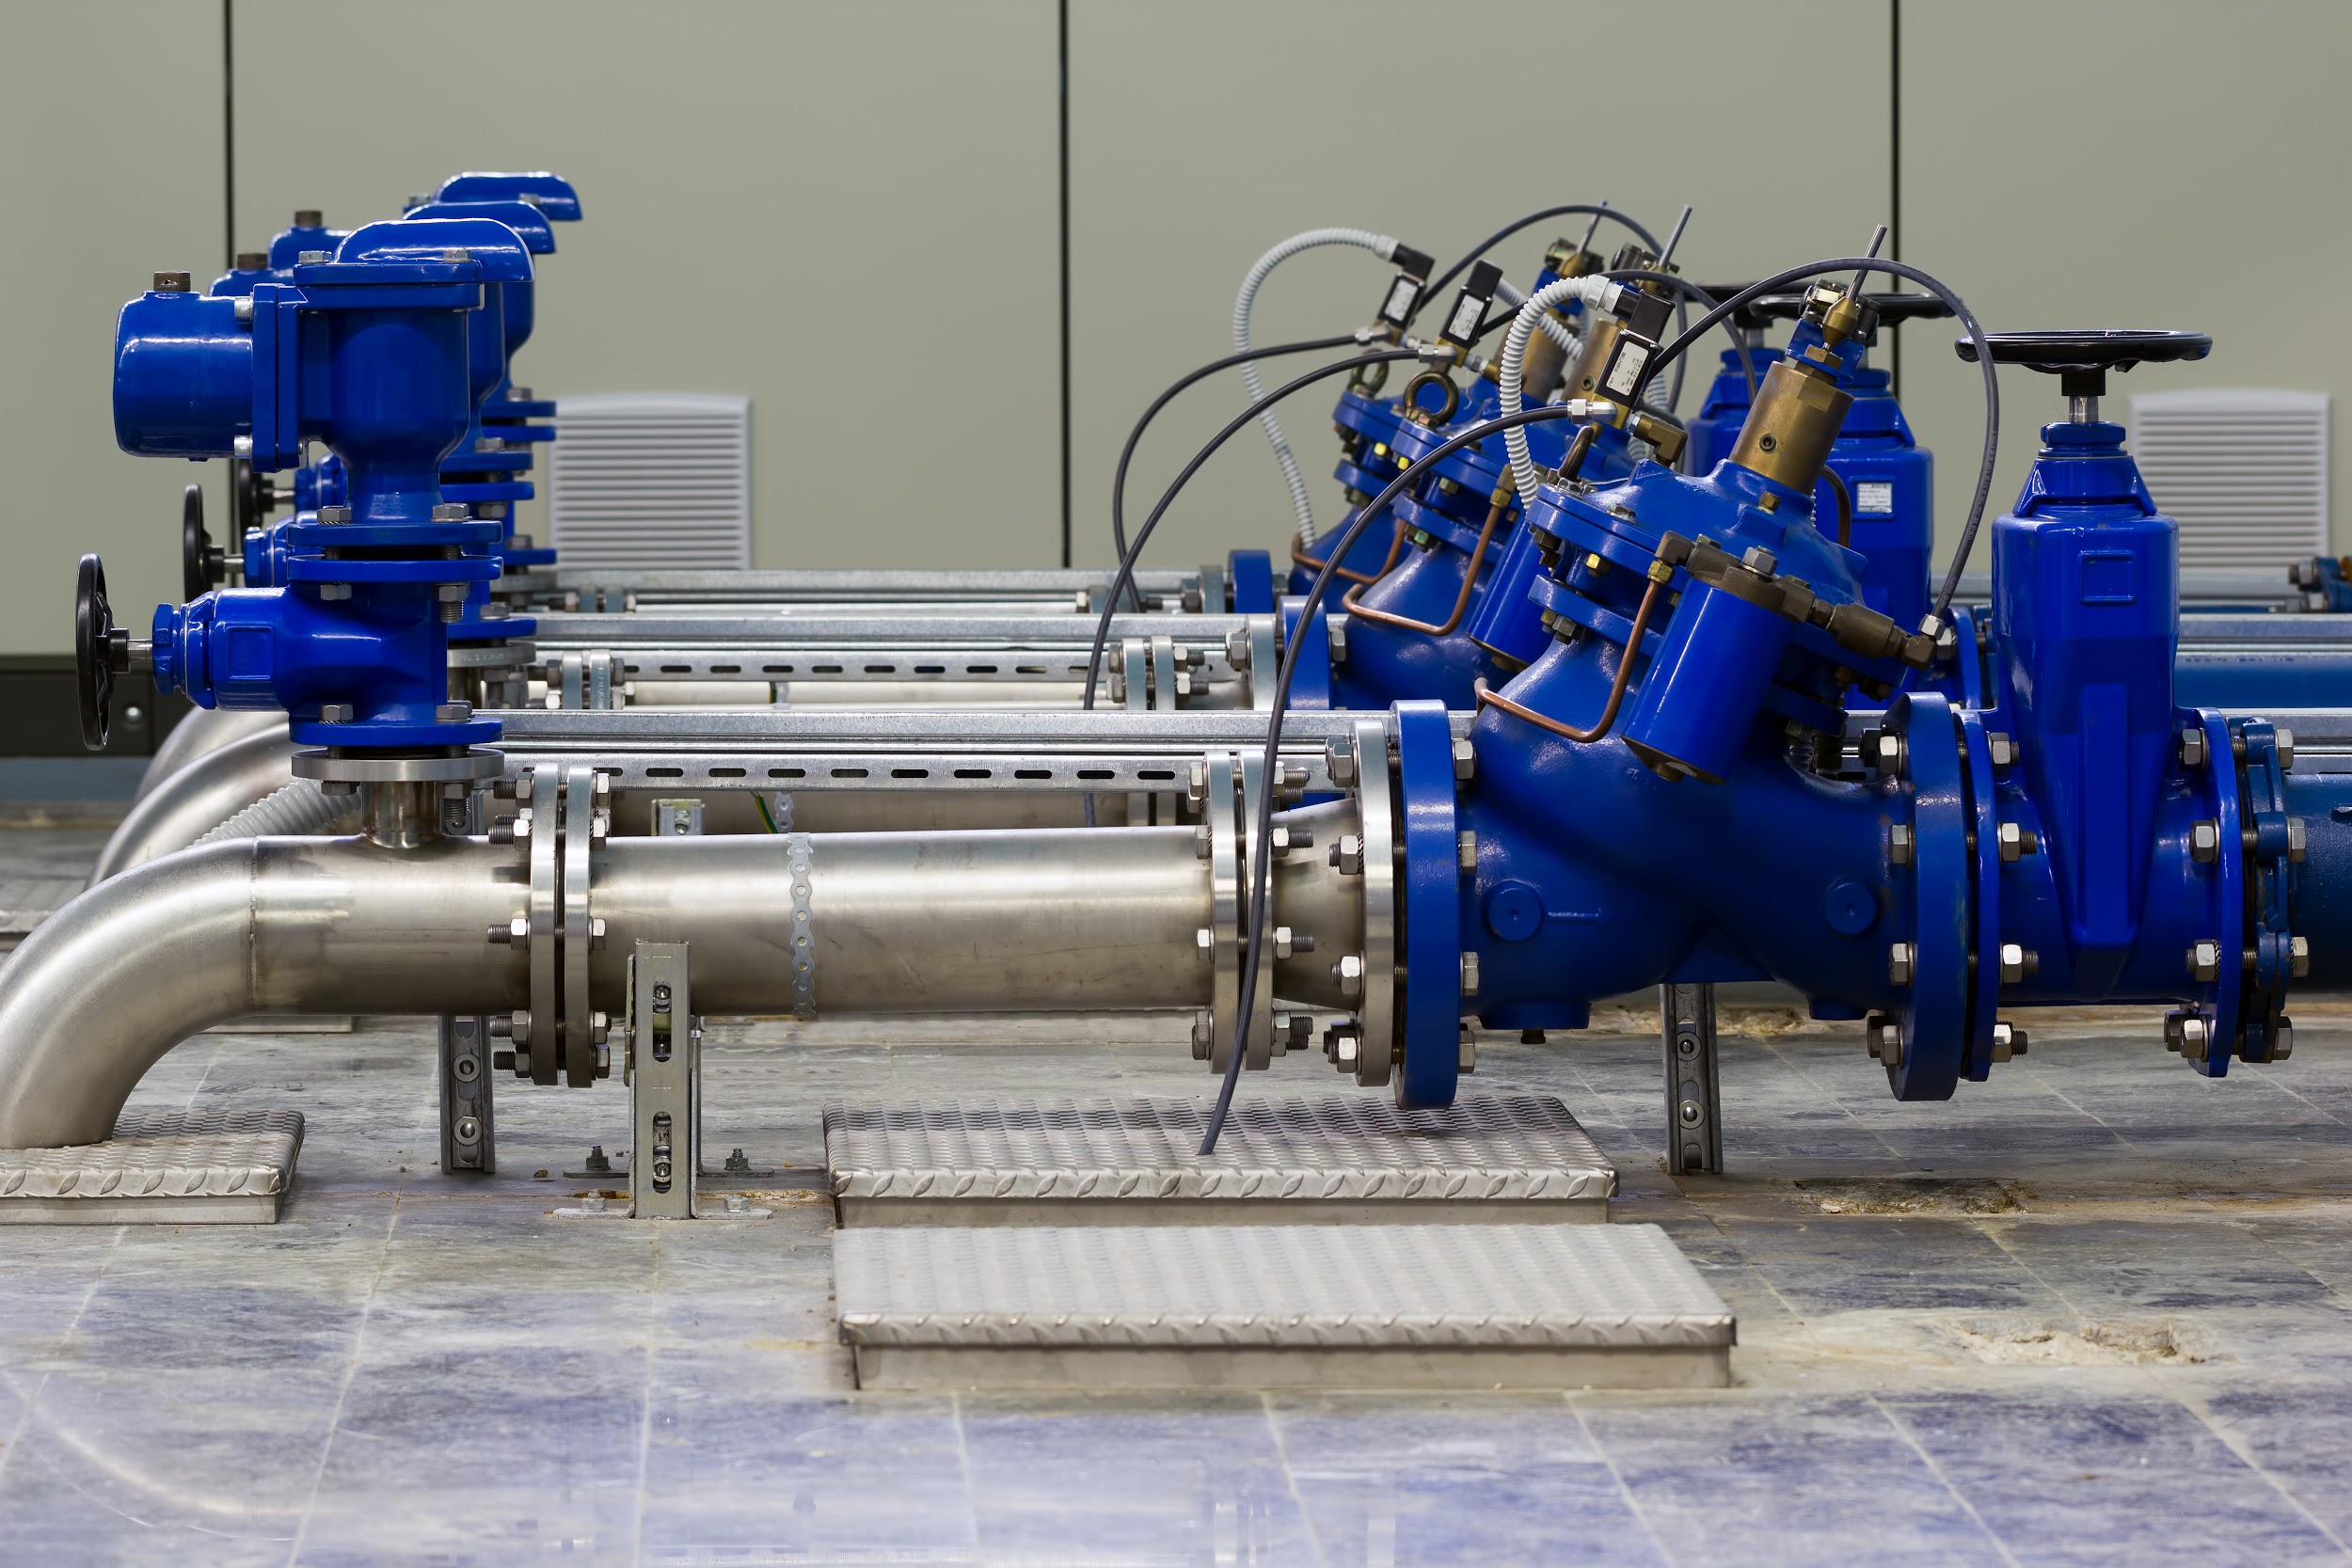 Water pumping station with booster pumps and valves